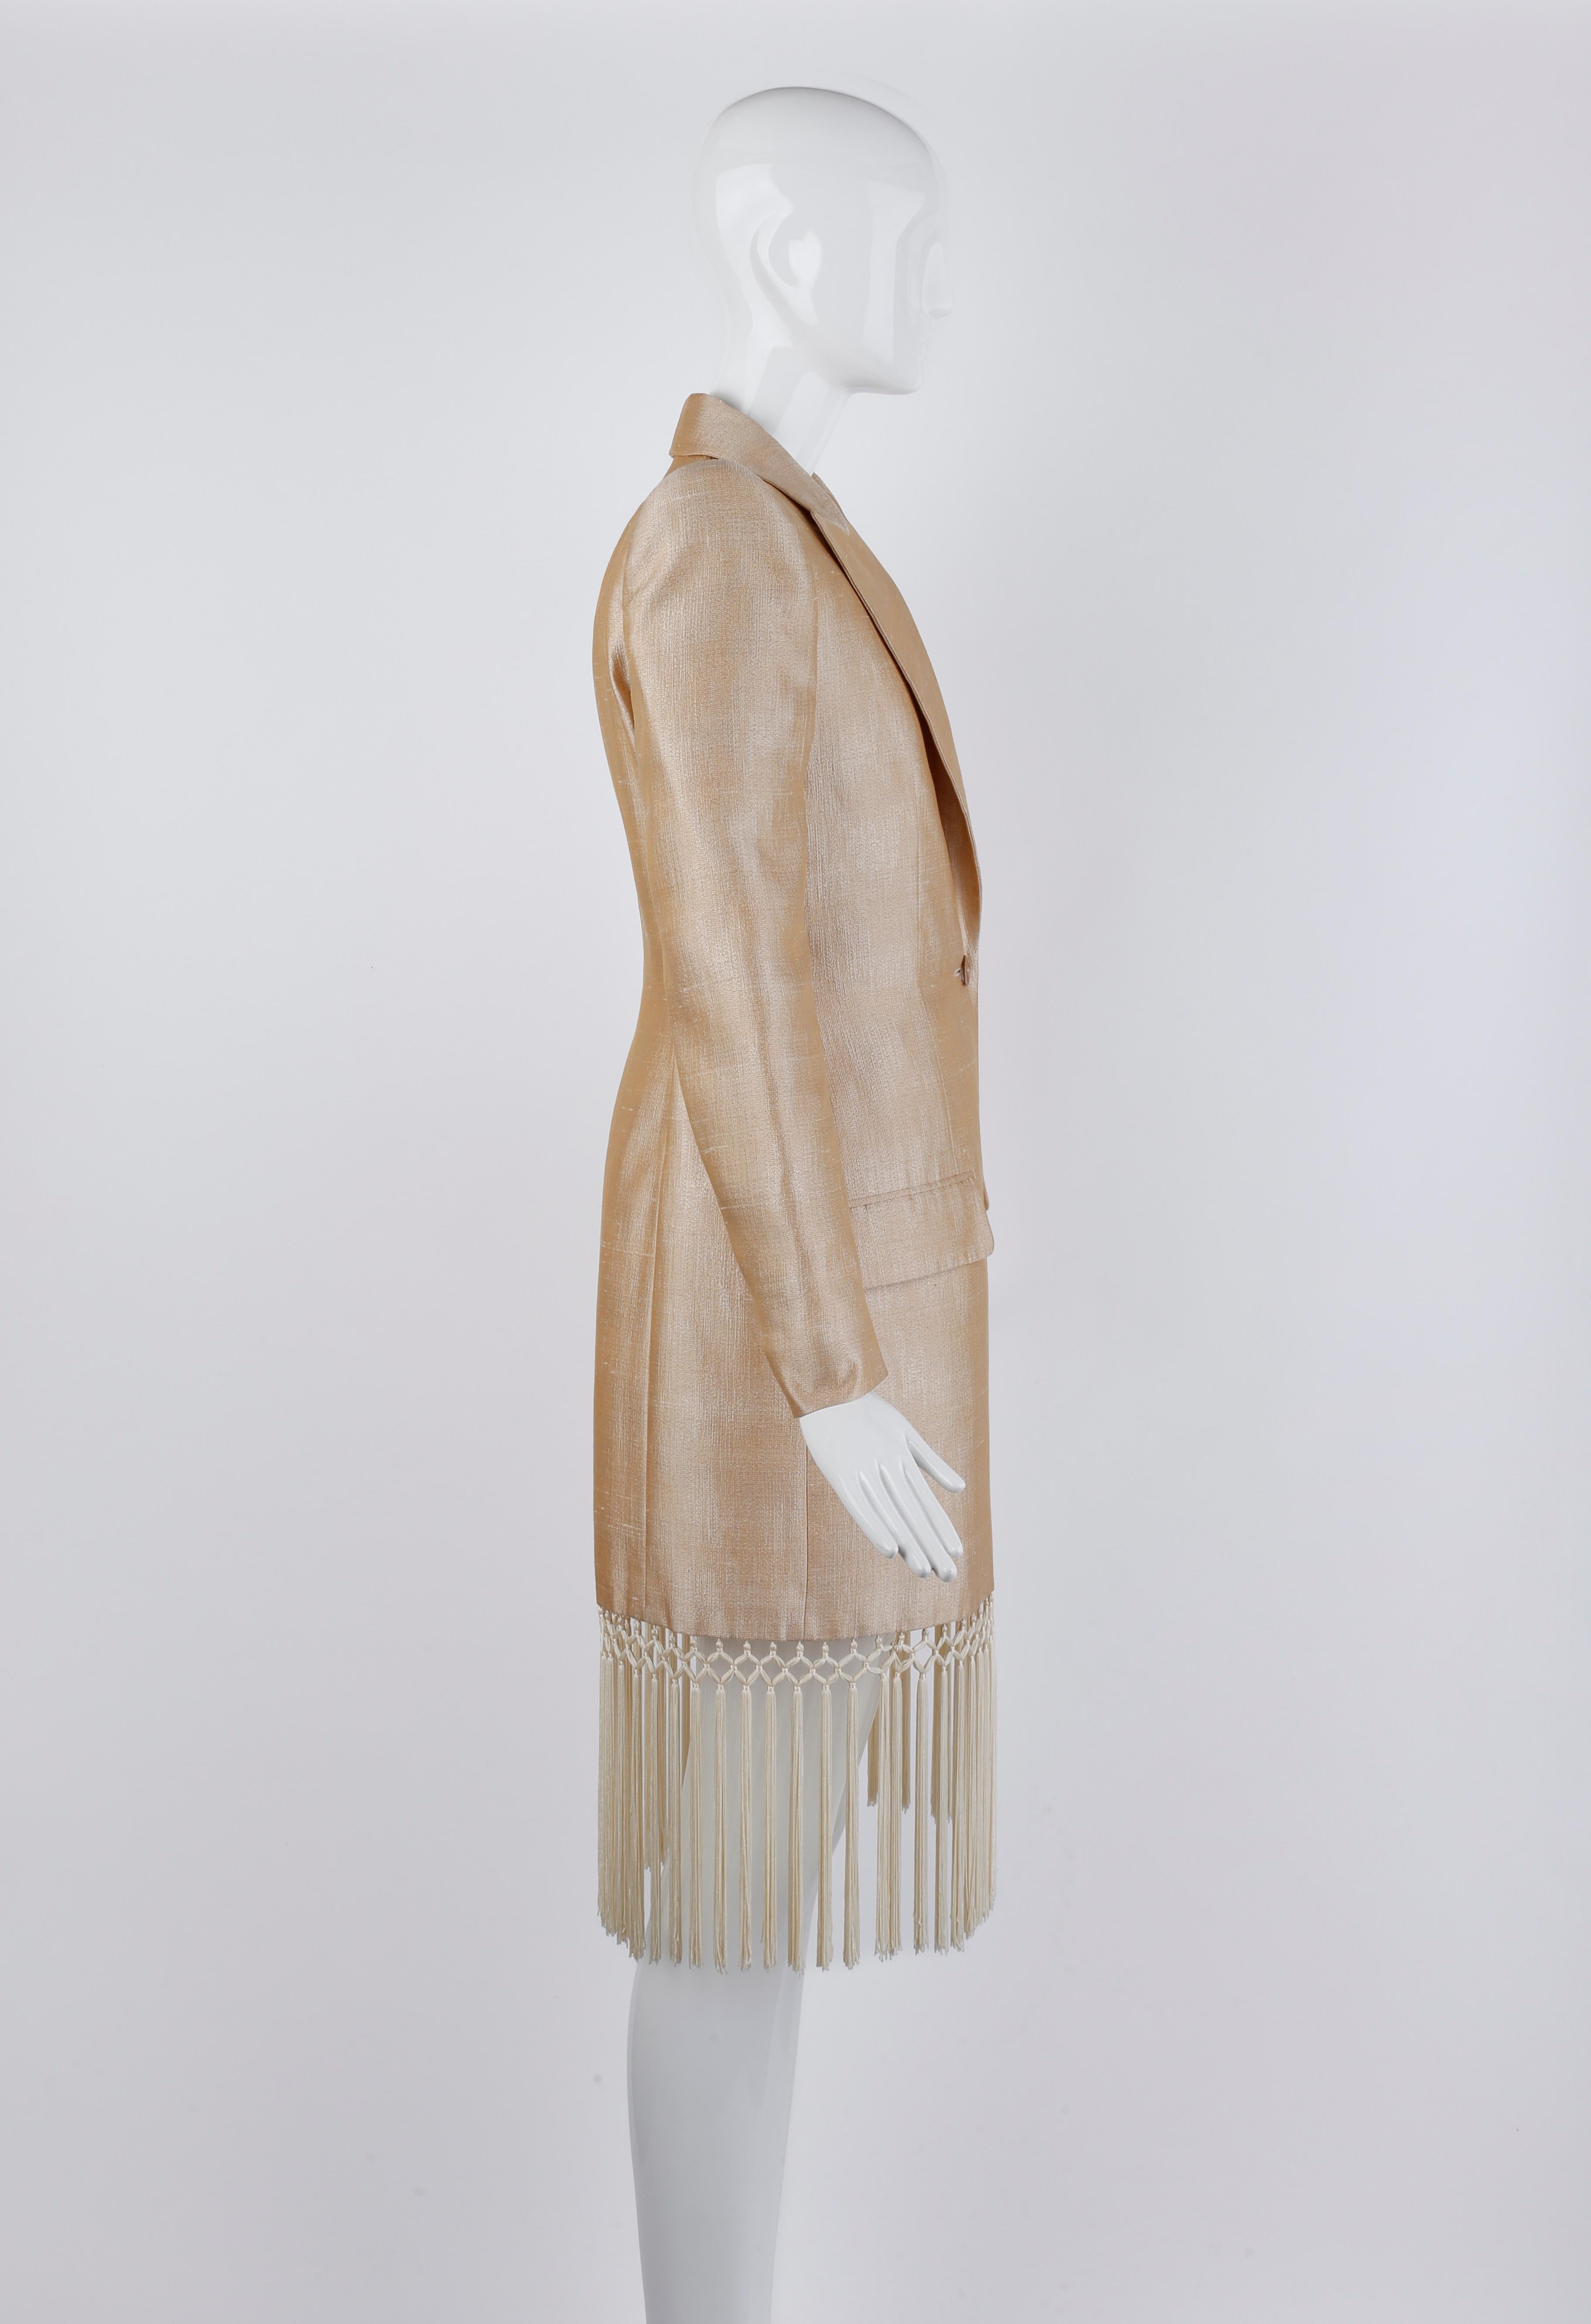 Givenchy Couture Alexander McQueen S/S 1998 Champagne Silk Tassel Dress Coat For Sale 1